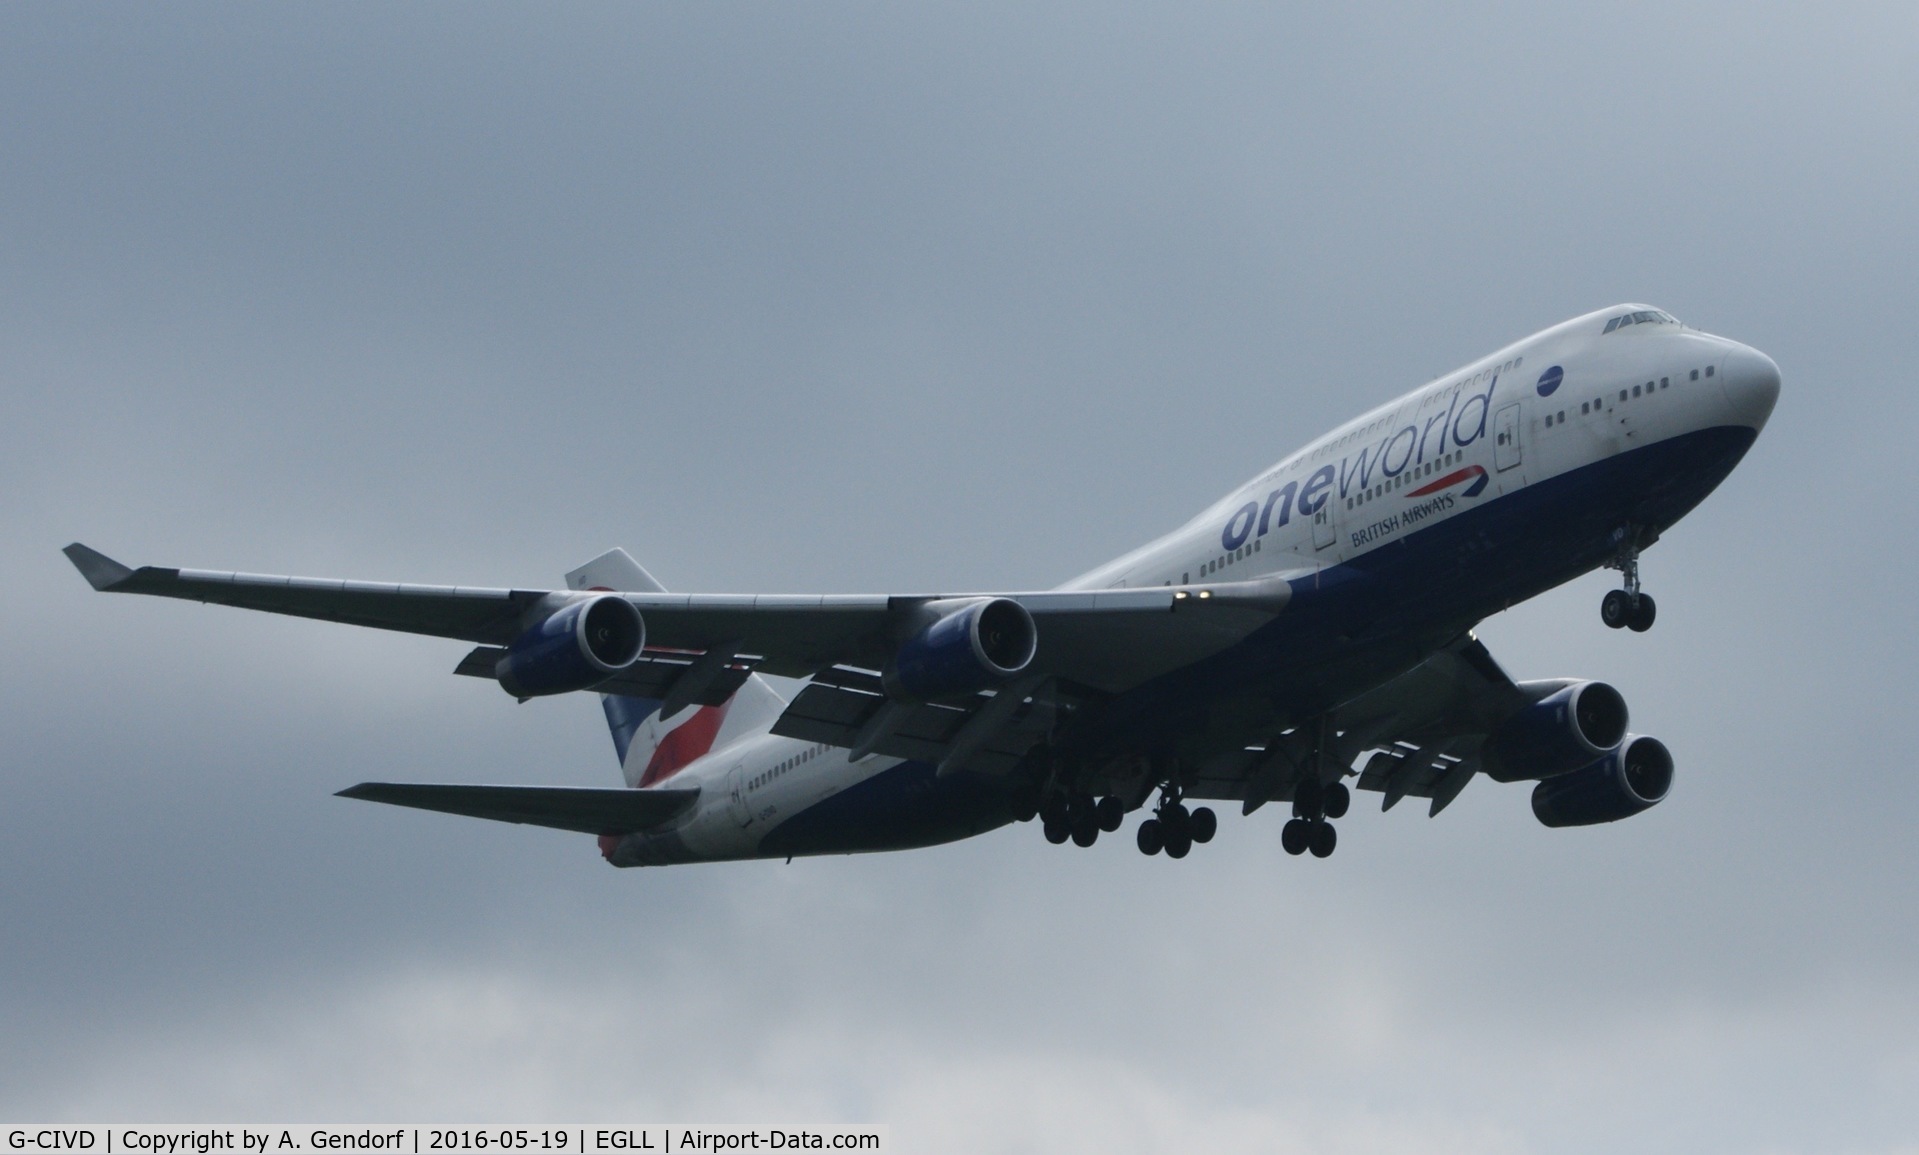 G-CIVD, 1994 Boeing 747-436 C/N 27349, British Airways (One World ttl.), see the queen of the skies here on short finals RWY 27R at London Heathrow(EGLL)